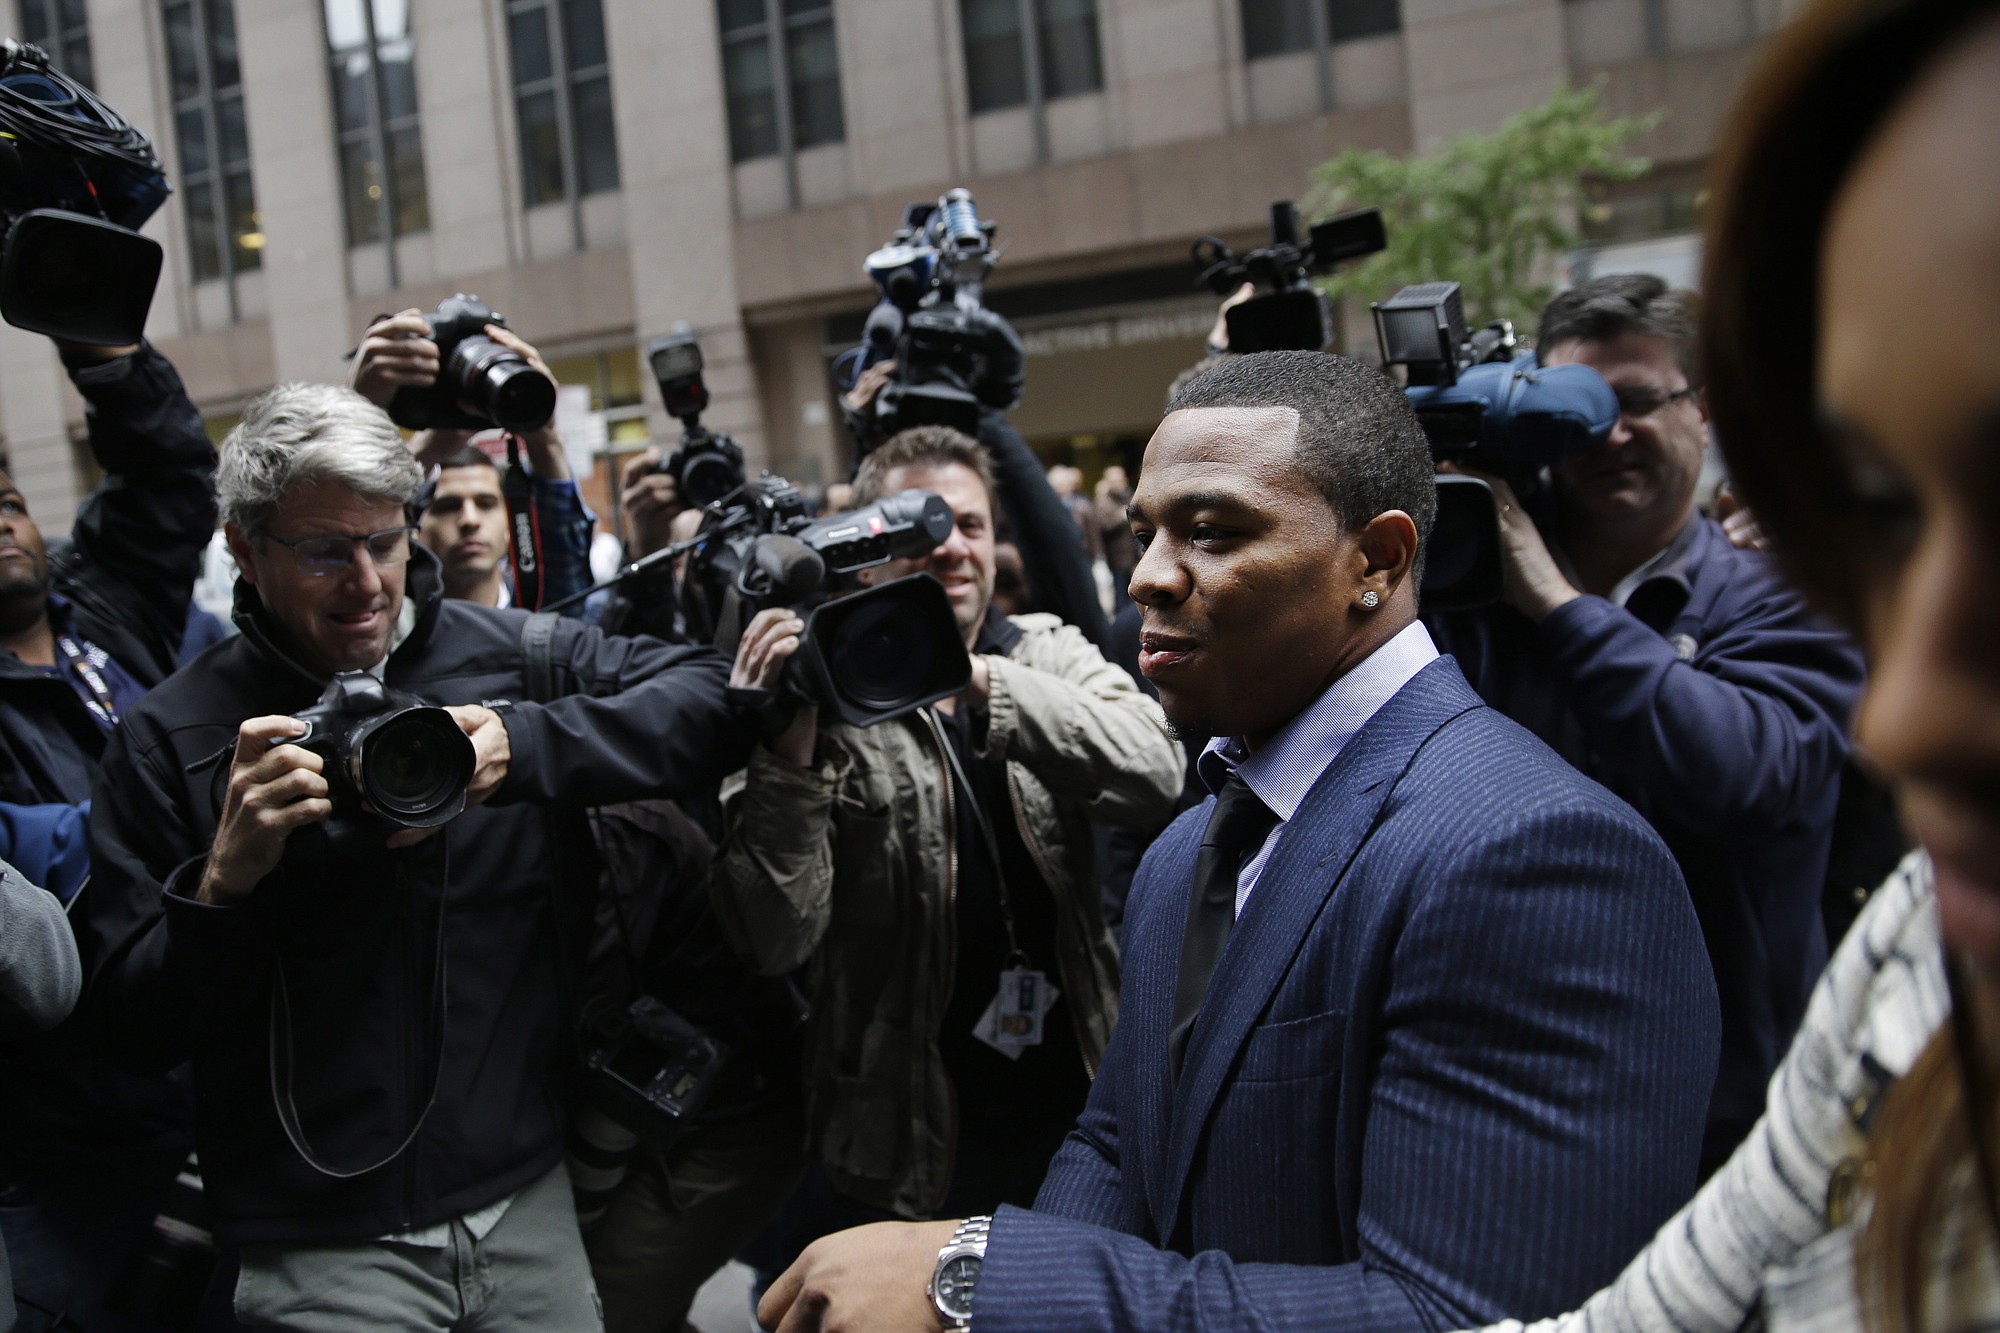 Ray Rice arrives with his wife, Janay Palmer, for an appeal hearing of his indefinite suspension from the NFL in New York.